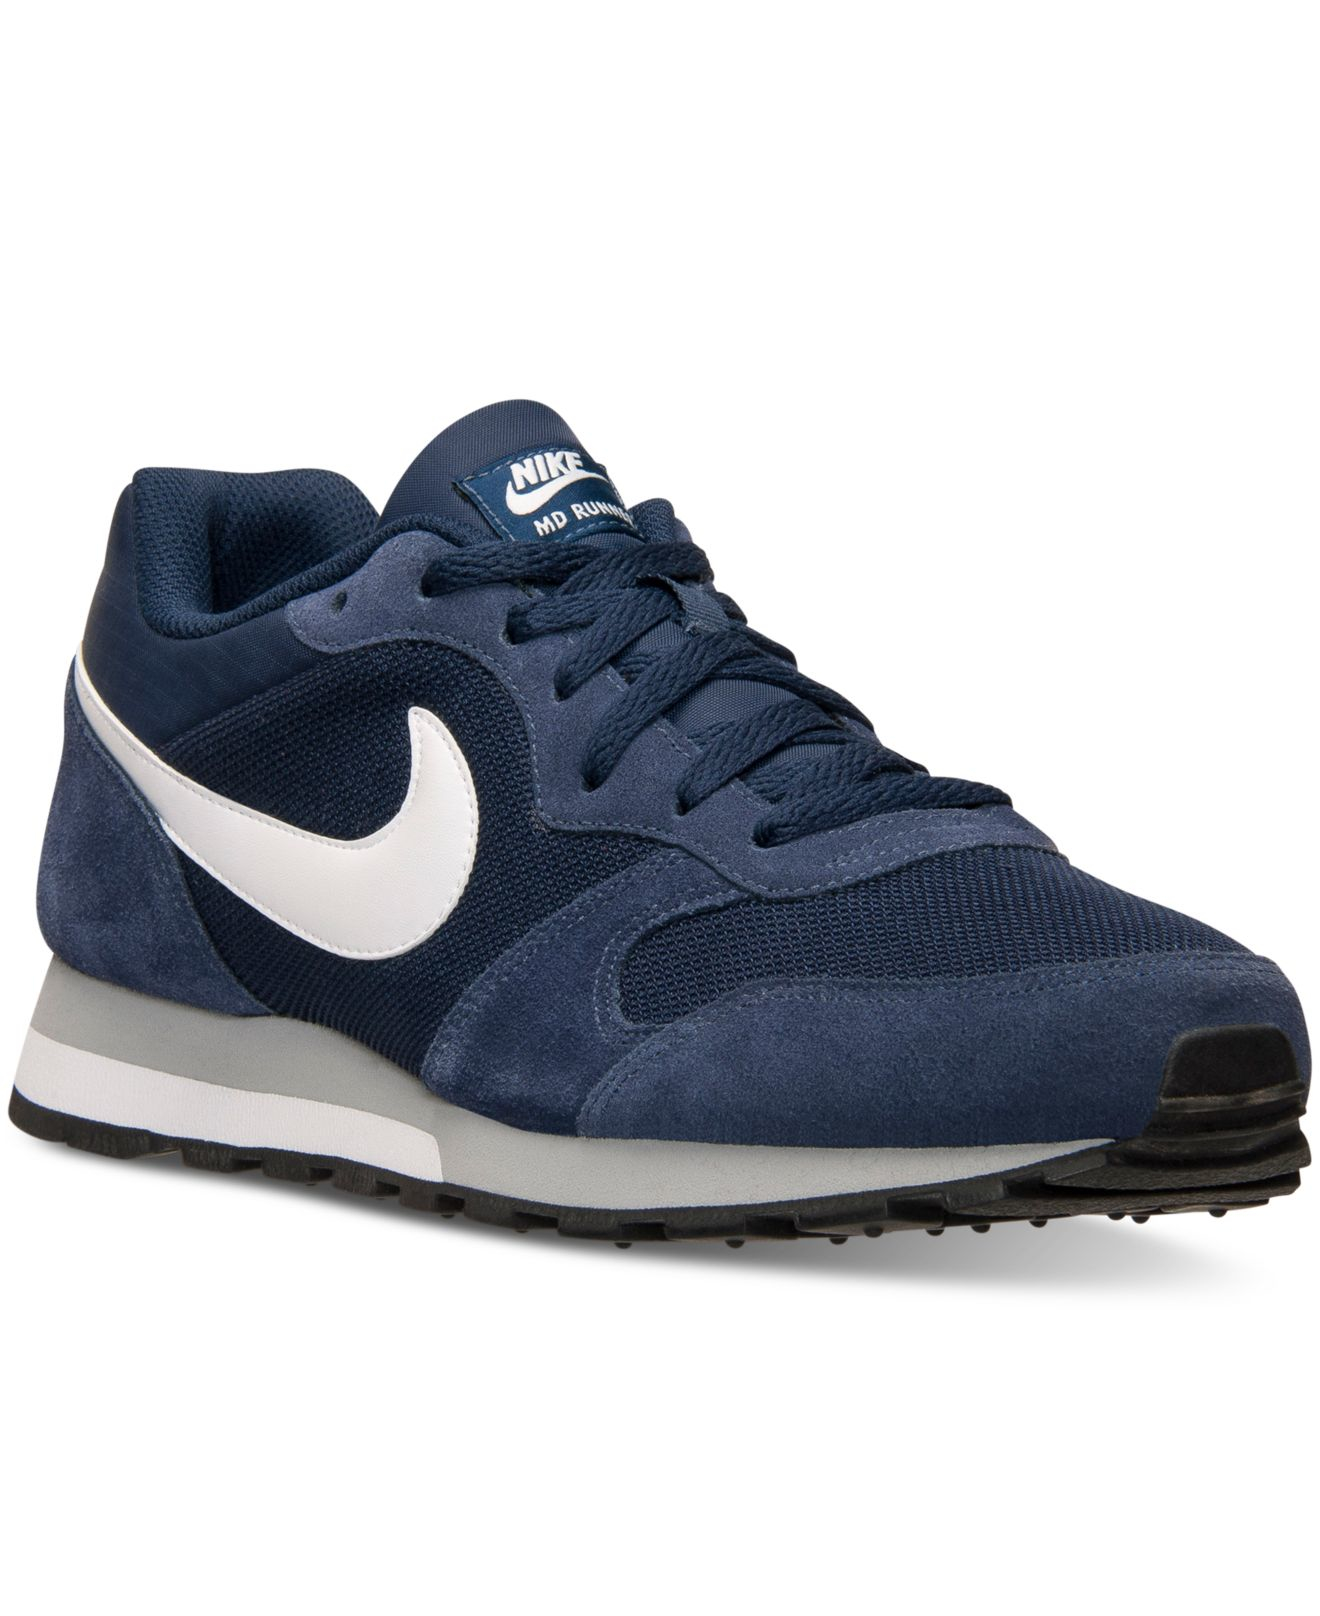 Nike Suede Men's Md Runner 2 Casual Sneakers From Finish Line in Blue for Men - Lyst